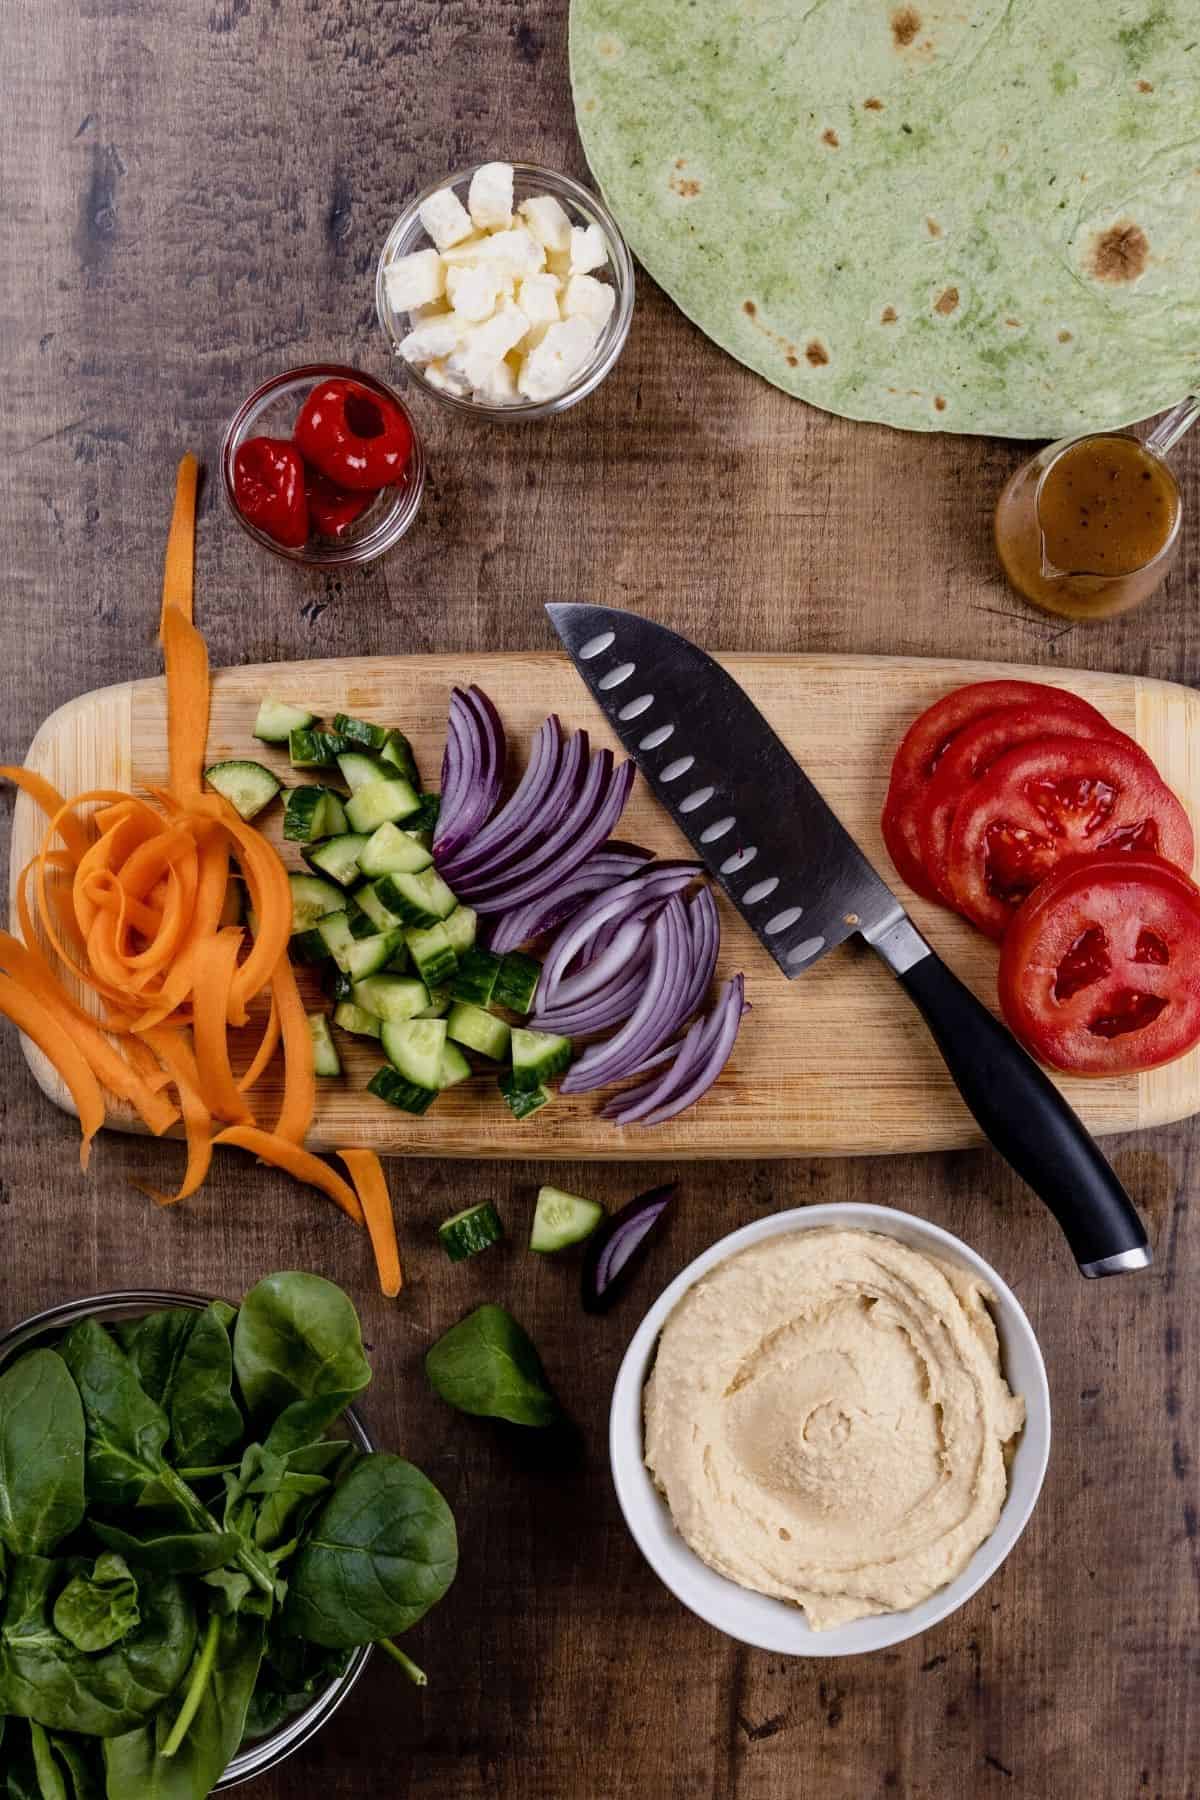 A wood cutting board with a knife cutting and slicing veggies for the wrap sandwich.